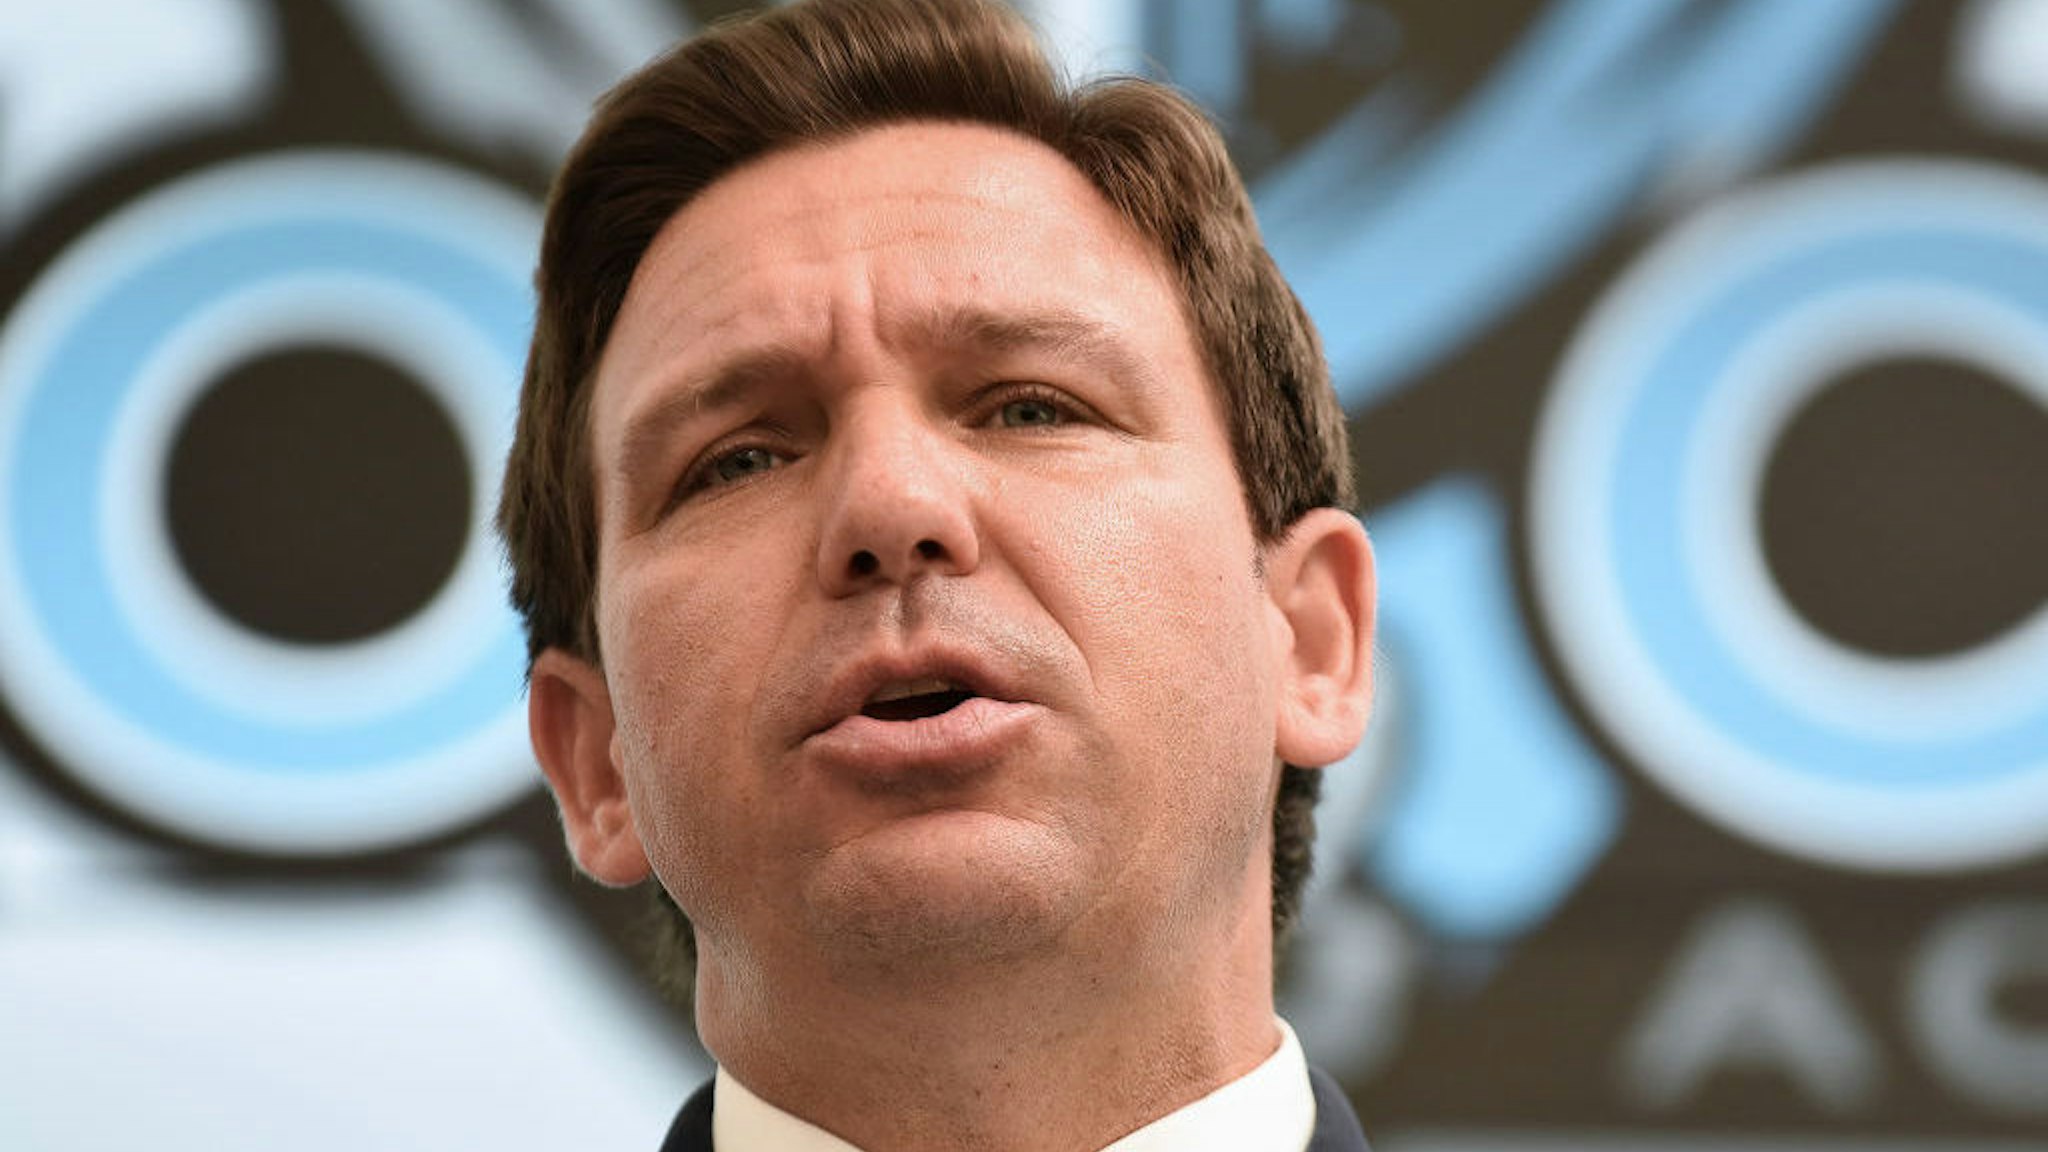 KISSIMMEE, FLORIDA, UNITED STATES - 2021/09/22: Florida Gov. Ron DeSantis speaks during a press conference before newly appointed state Surgeon General Dr. Joseph Ladapo at Neo City Academy in Kissimmee, Florida.